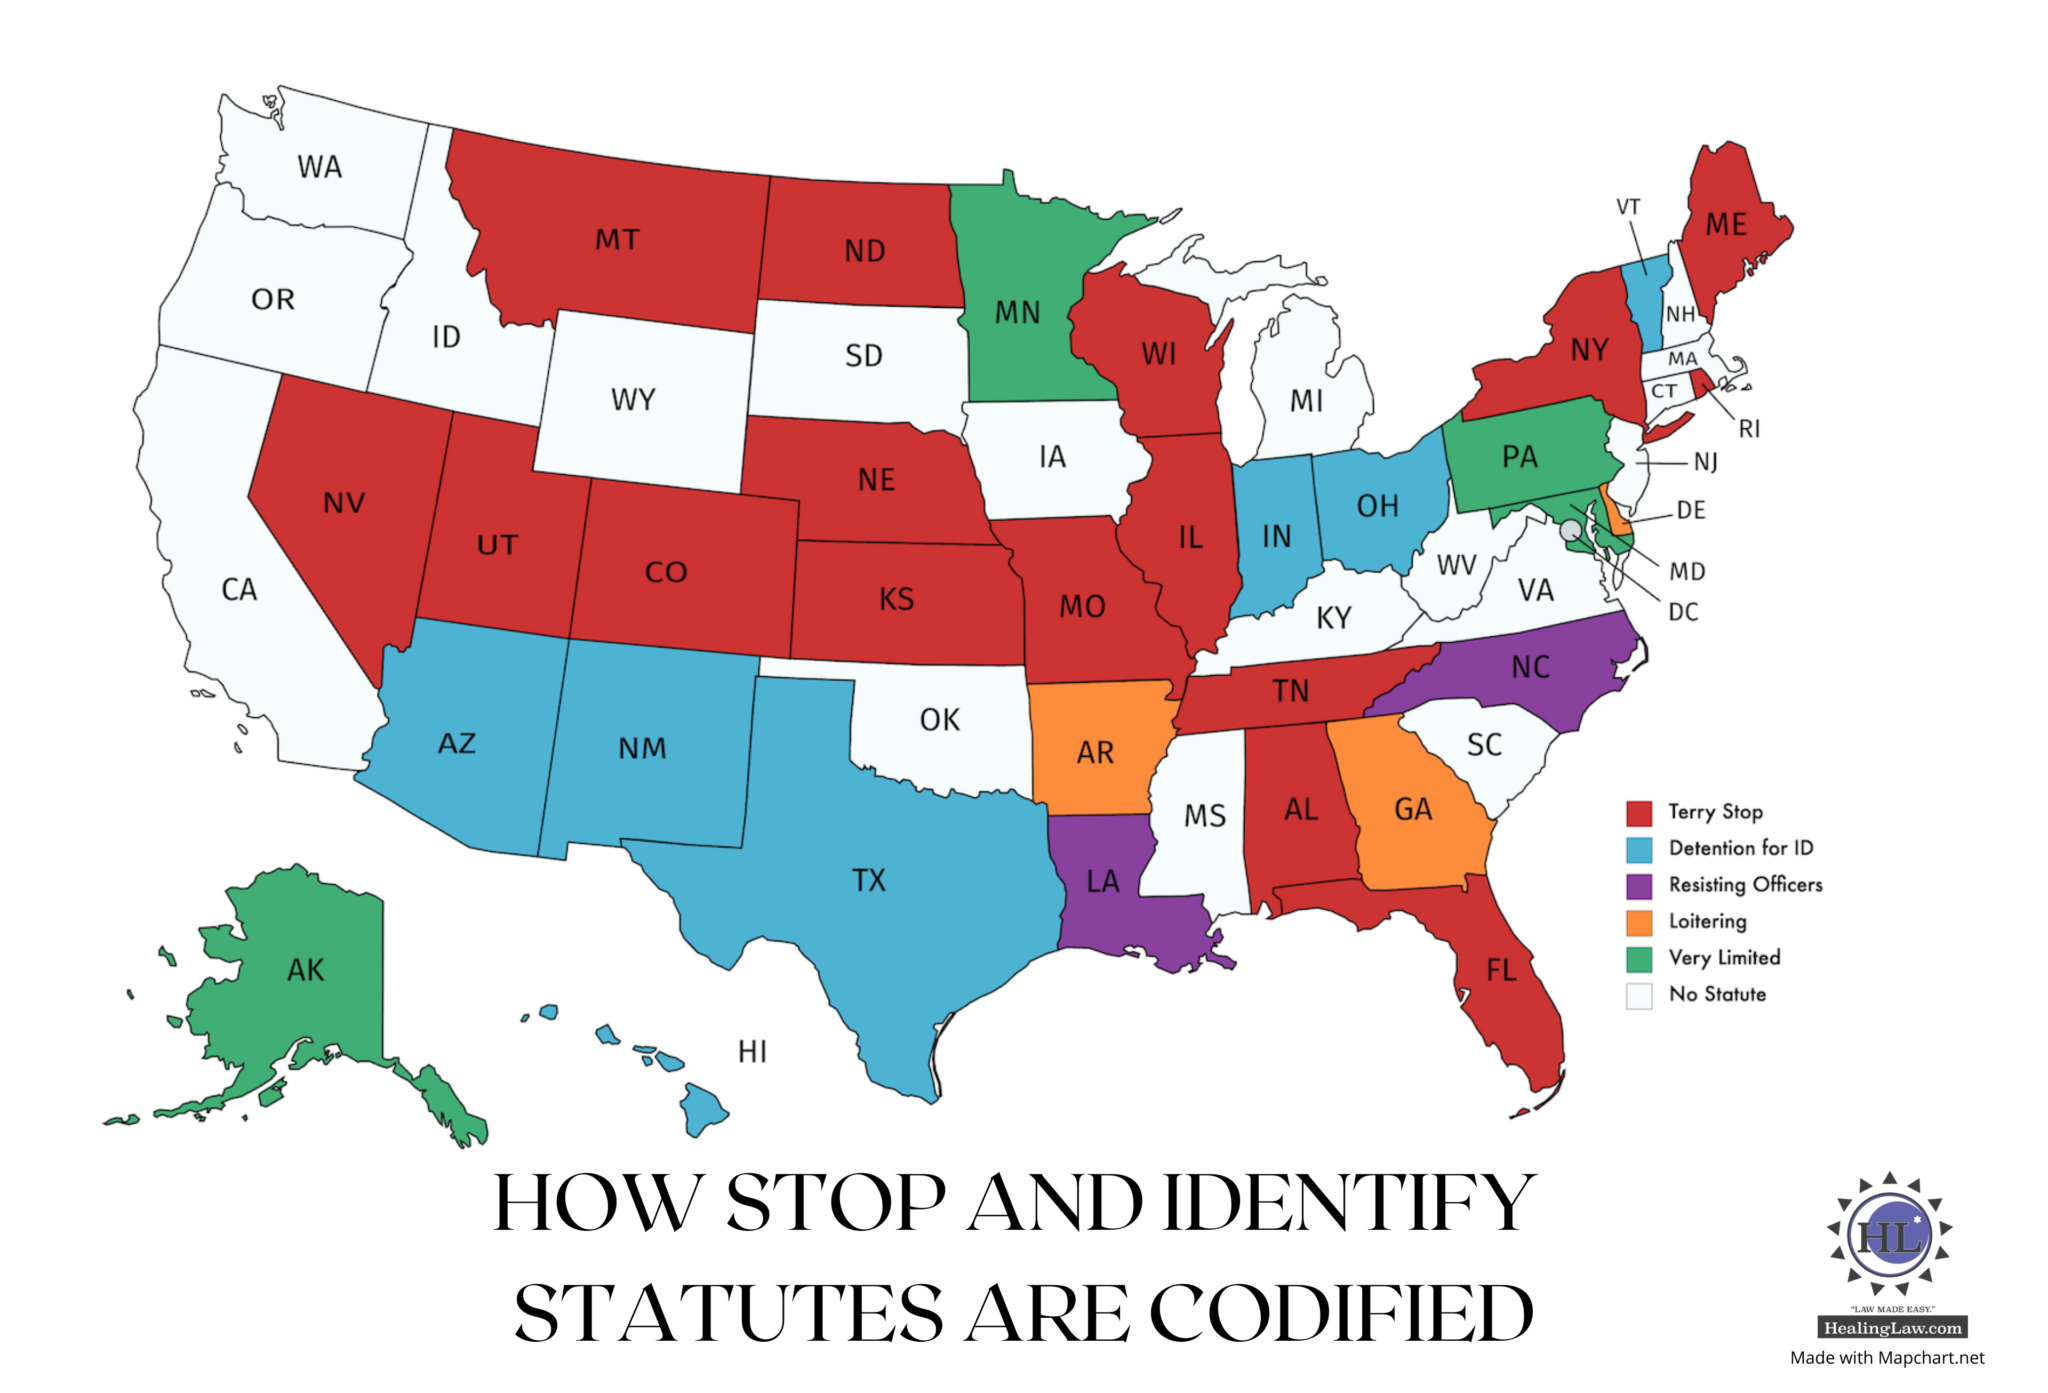 What is a Stop and Identify Statute? [Study w/ Map of 50 States]